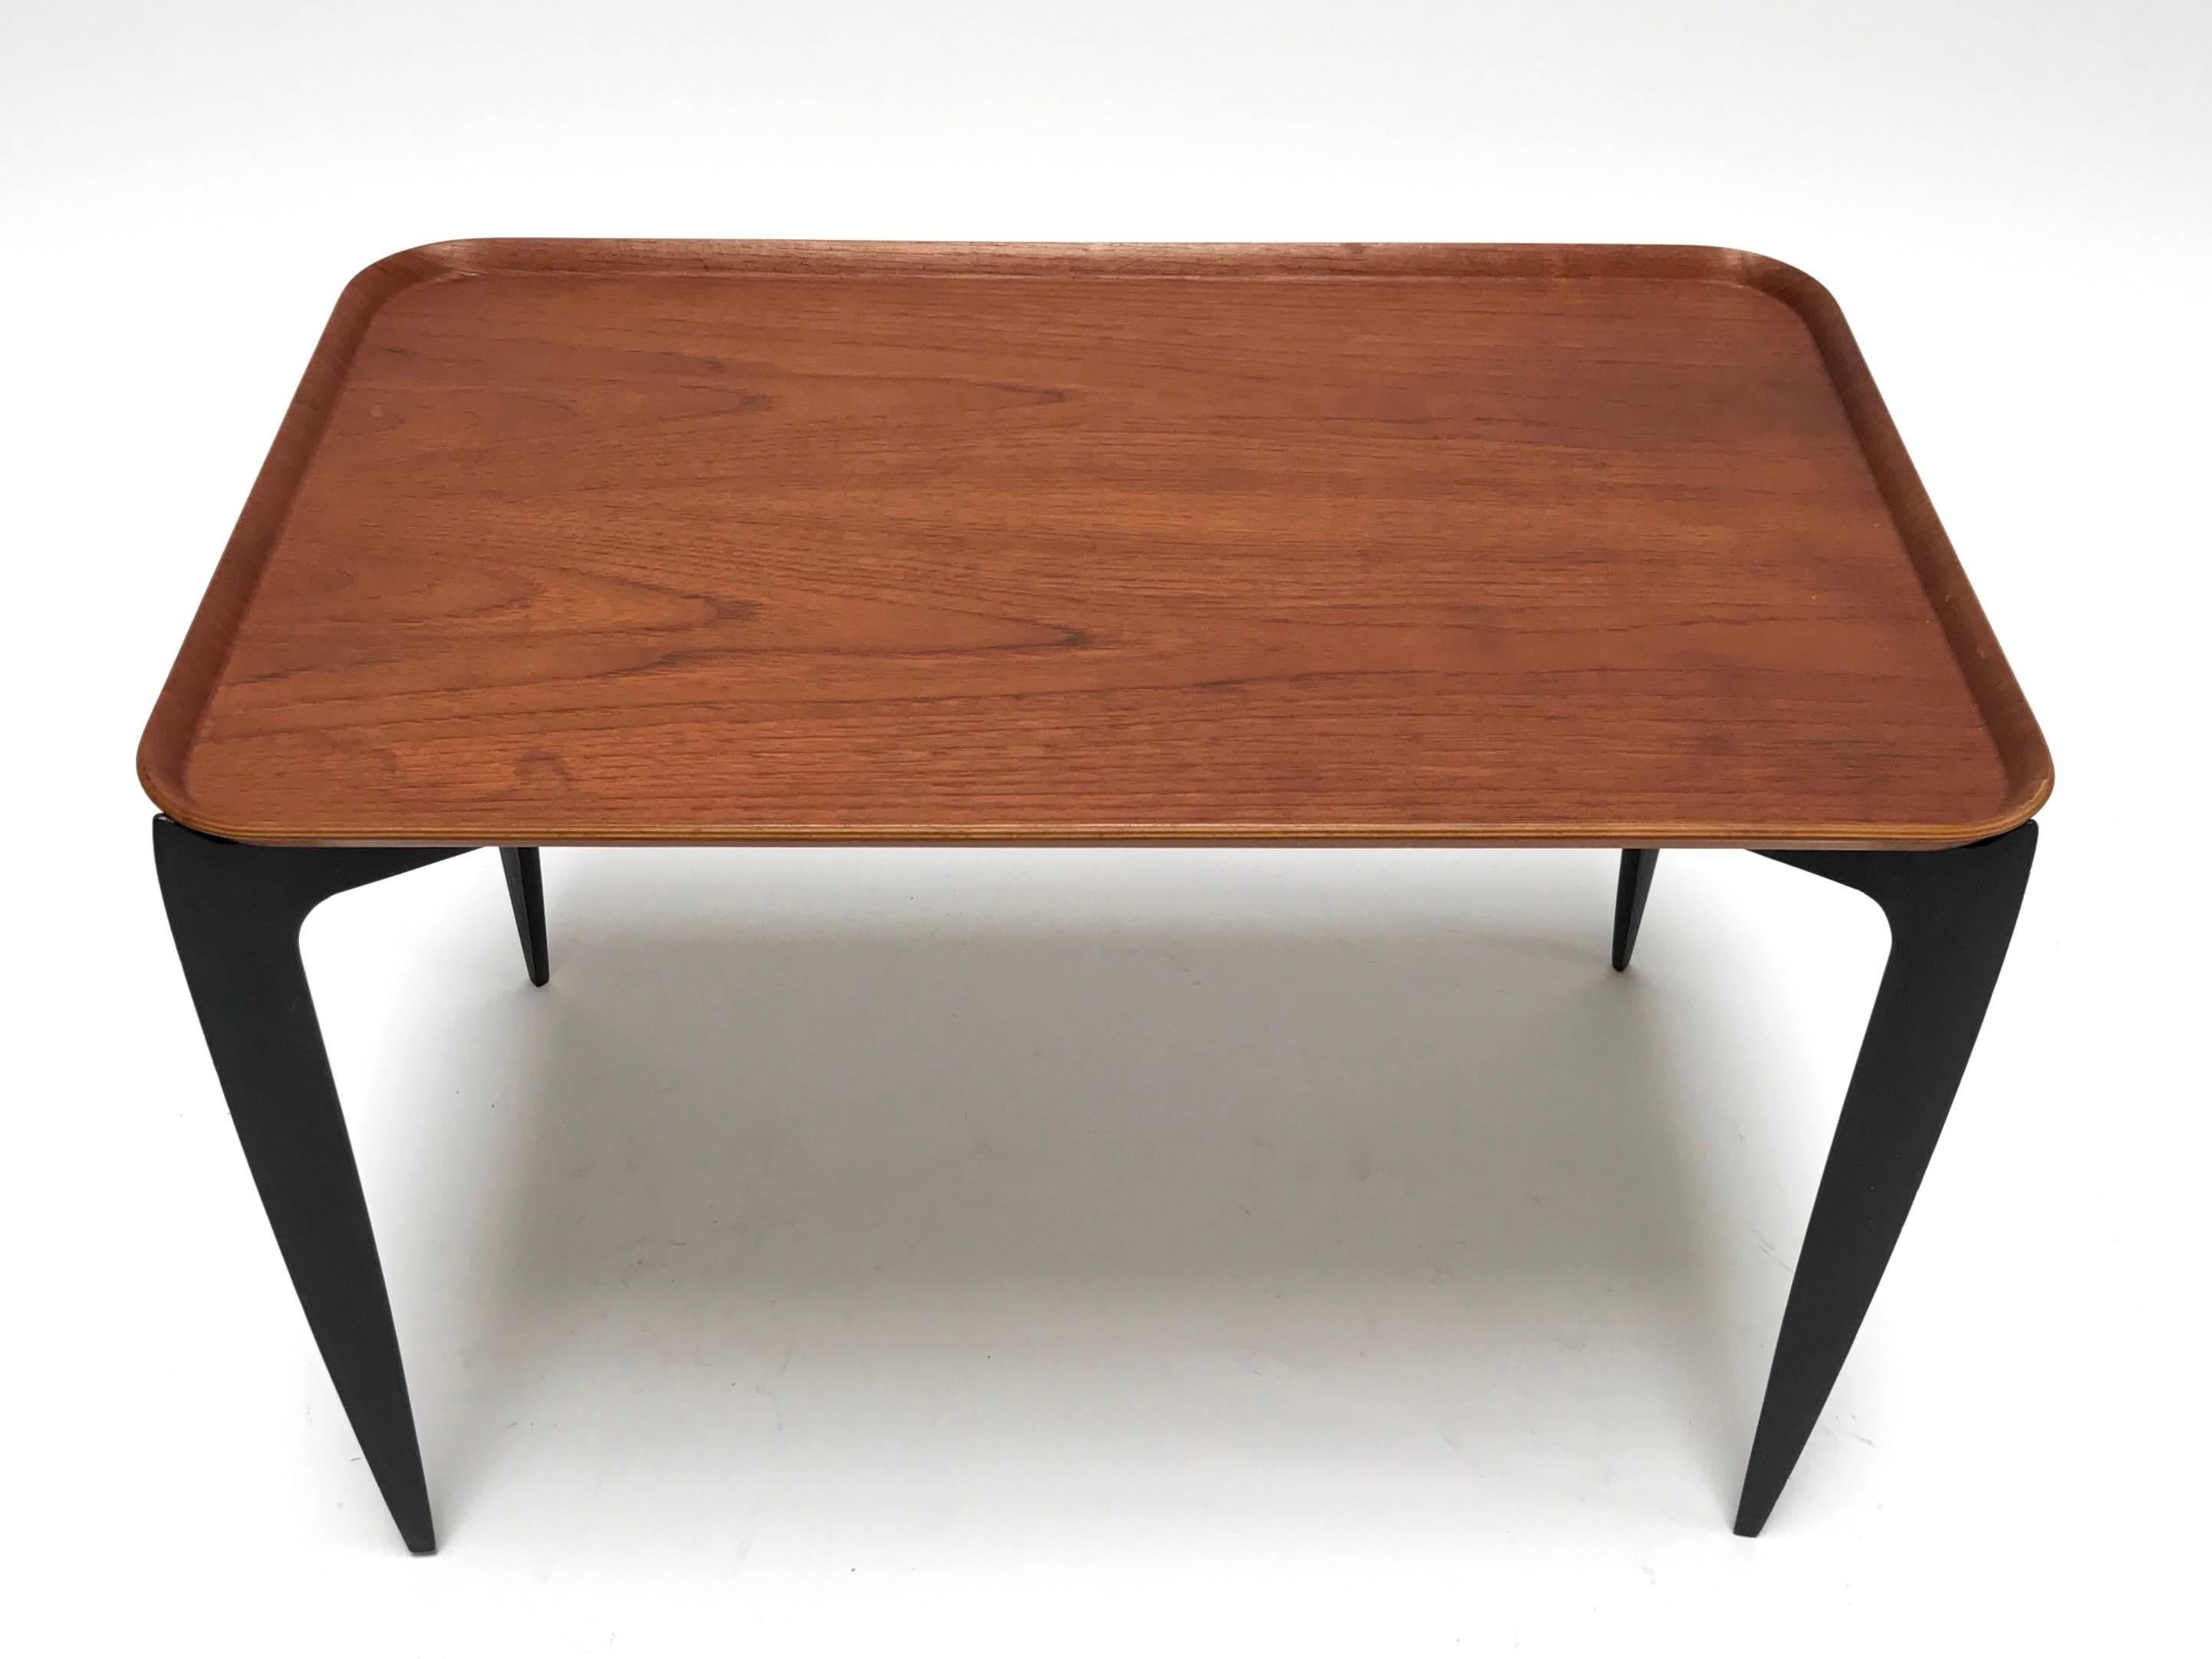 A very rare 1950s rectangular version of Fritz Hansen’s folding tray table designed by Svend Åge Willumsen & Hans Engholm. Unlike the much more common round version, this design was only gifted or made available to employees of Fritz Hansen in